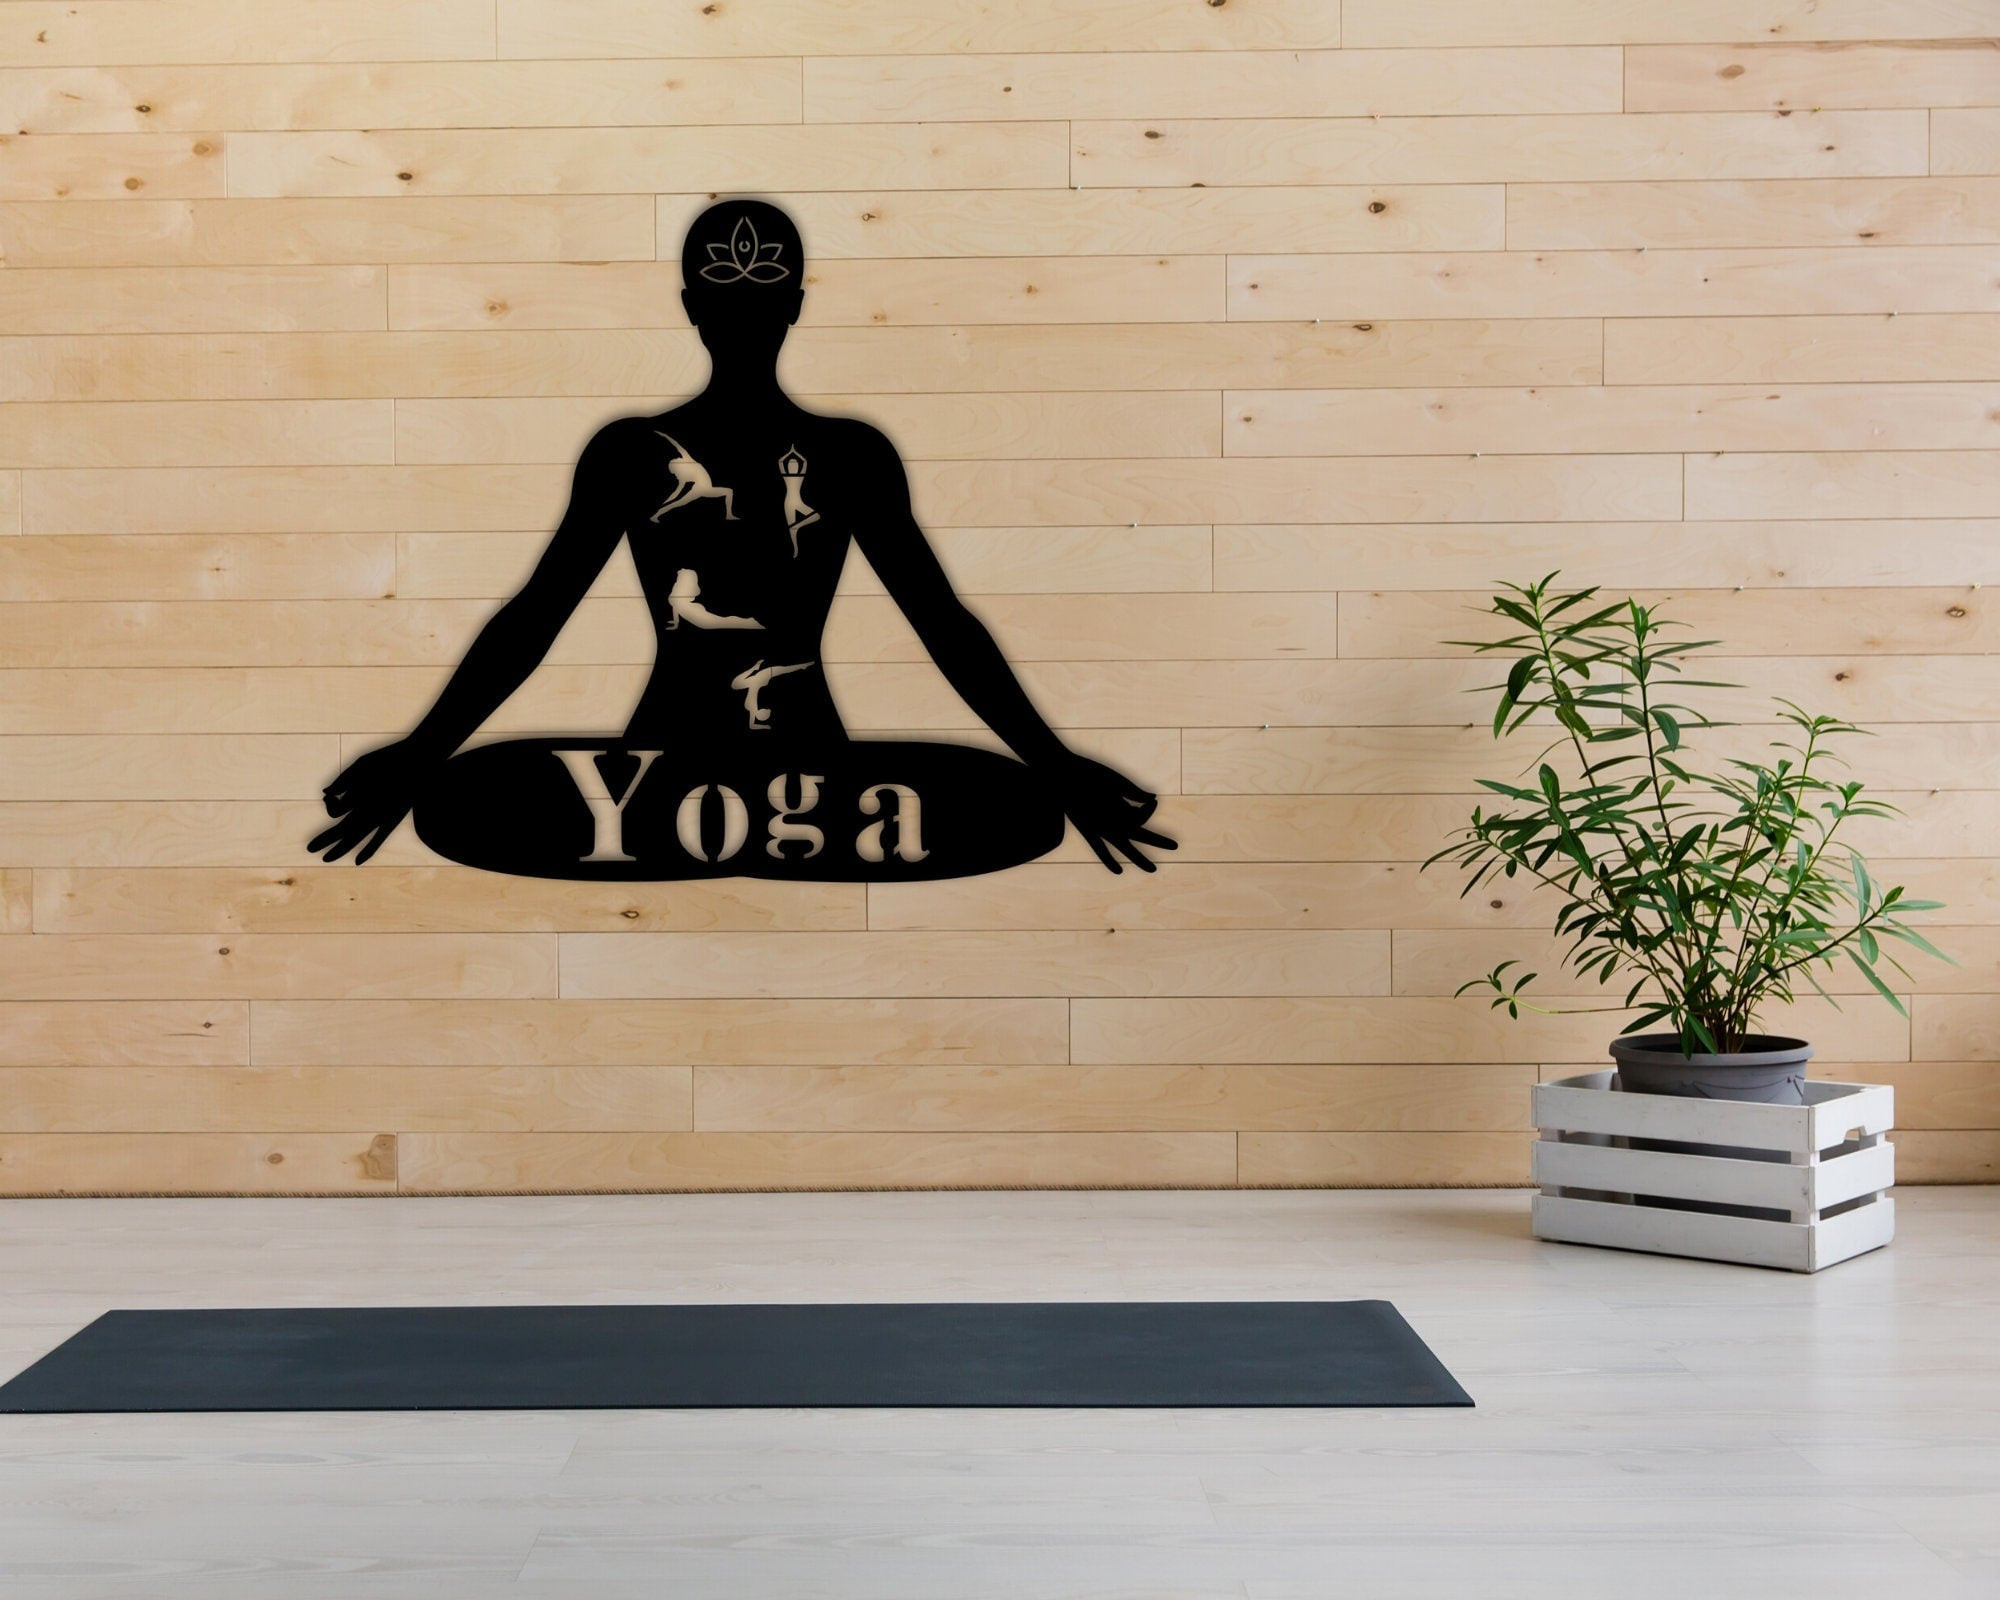 Yoga Sign Personalized, Home Yoga Sign, Personalized Yoga Sign, Yoga Sign For Home Metal Sign, Custom Yoga Sign, Yoga Decor, Yoga Decoration, Laser Cut Metal Signs Custom Gift Ideas 12x12IN